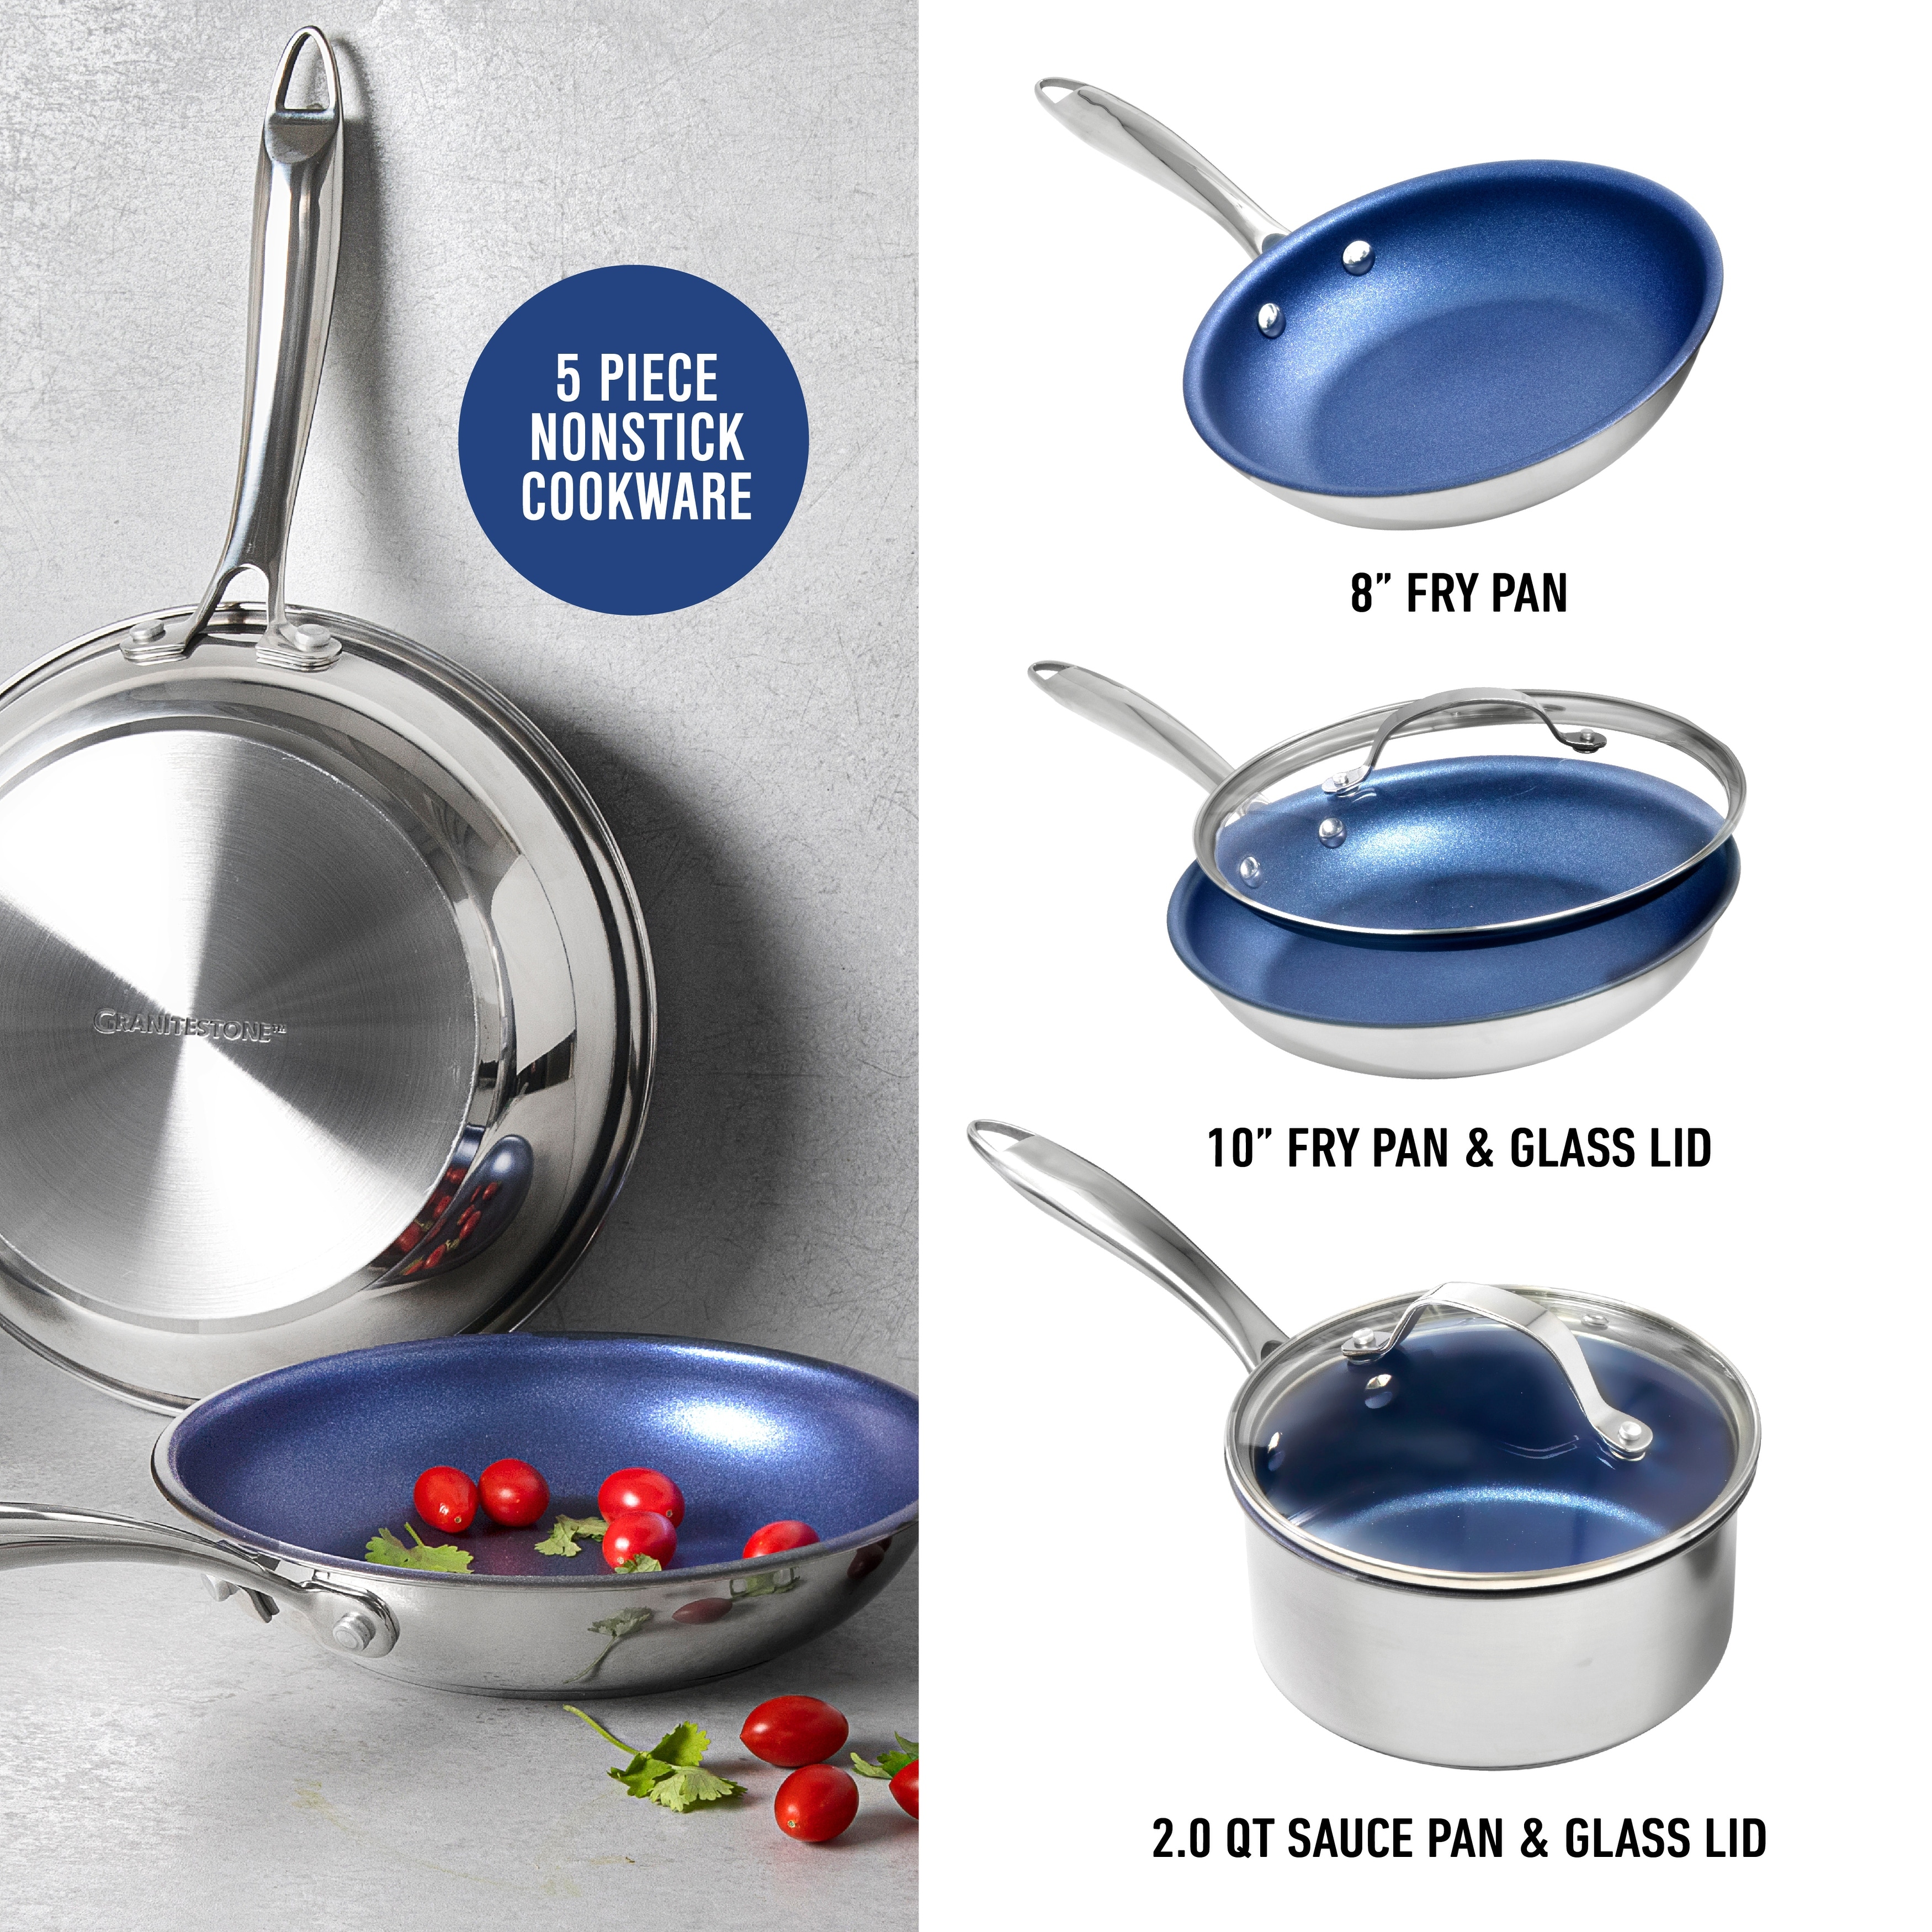 https://ak1.ostkcdn.com/images/products/is/images/direct/19dff31aef528d5c4f178e1bba85dbb9c465a79b/Granitestone-Blue-Stainless-Steel-5-Piece-Cookware-Set.jpg